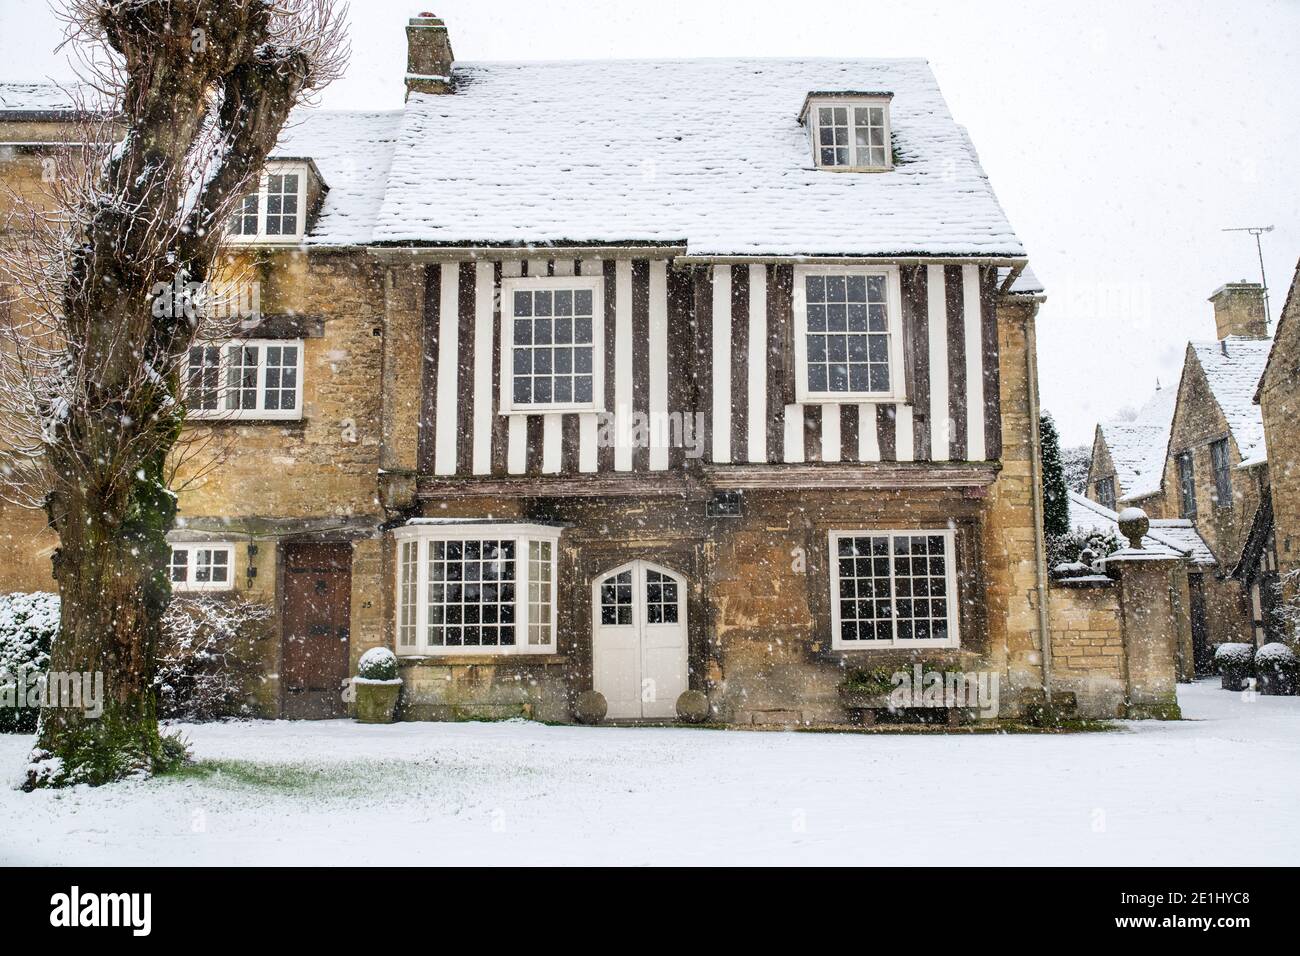 Stone and timber framed house in the December snow. Sheep street,  Burford, Cotswolds, Oxfordshire, England Stock Photo